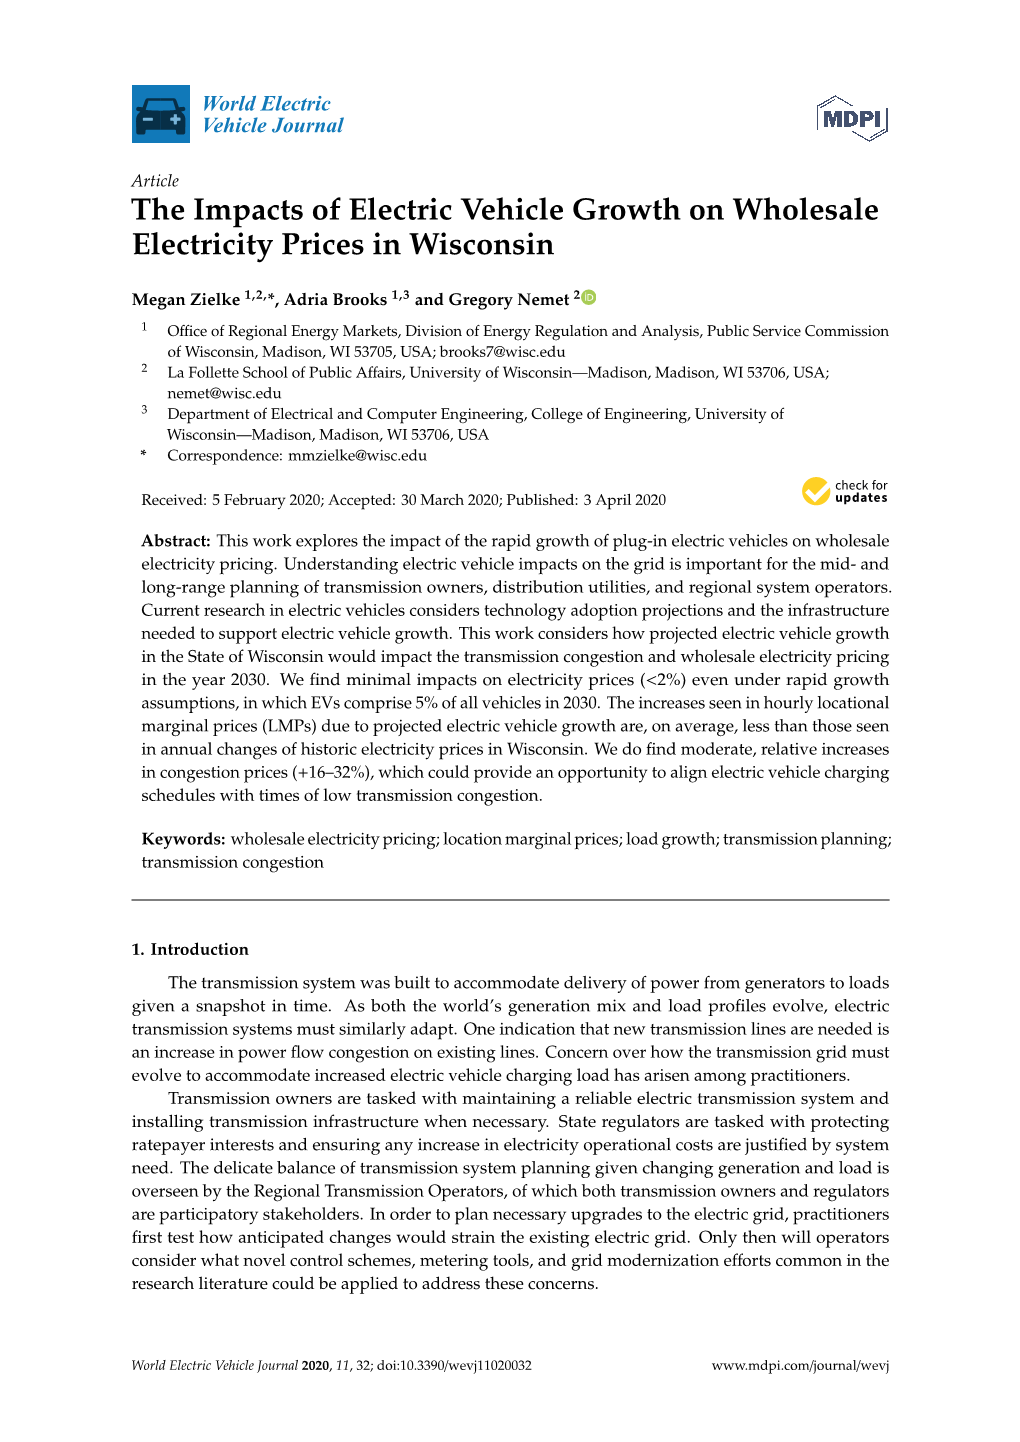 The Impacts of Electric Vehicle Growth on Wholesale Electricity Prices in Wisconsin